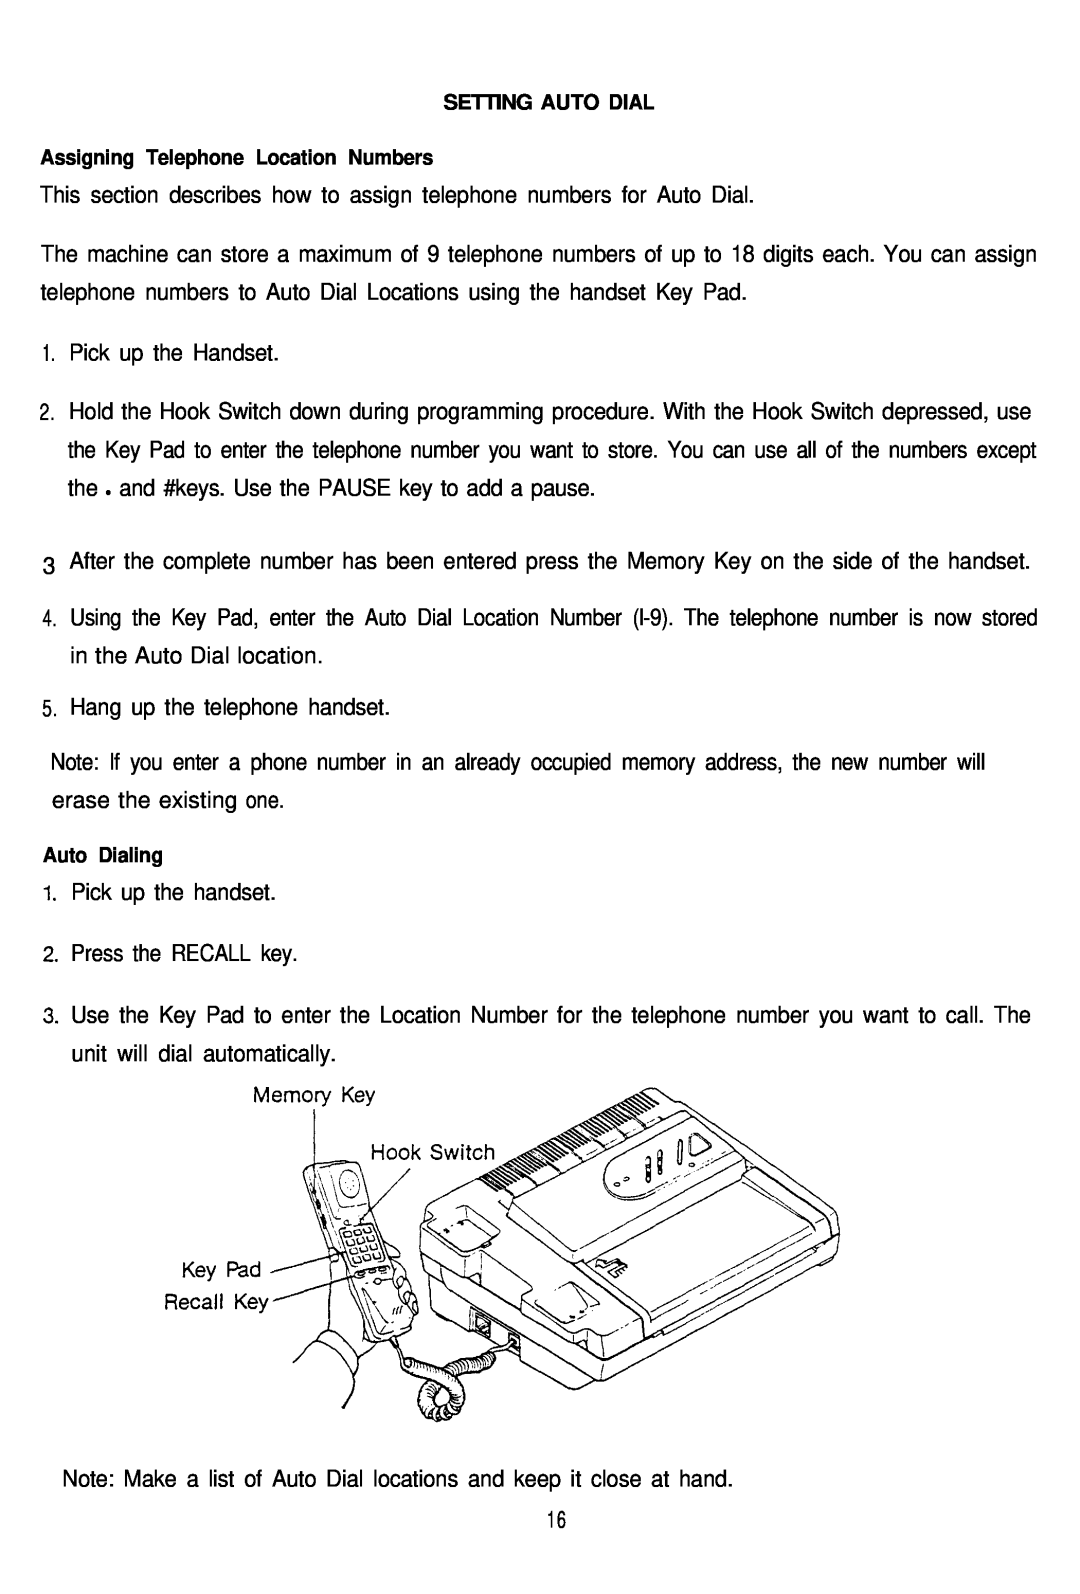 Audiovox AFX-1000 operation manual This section describes how to assign telephone numbers for Auto Dial 